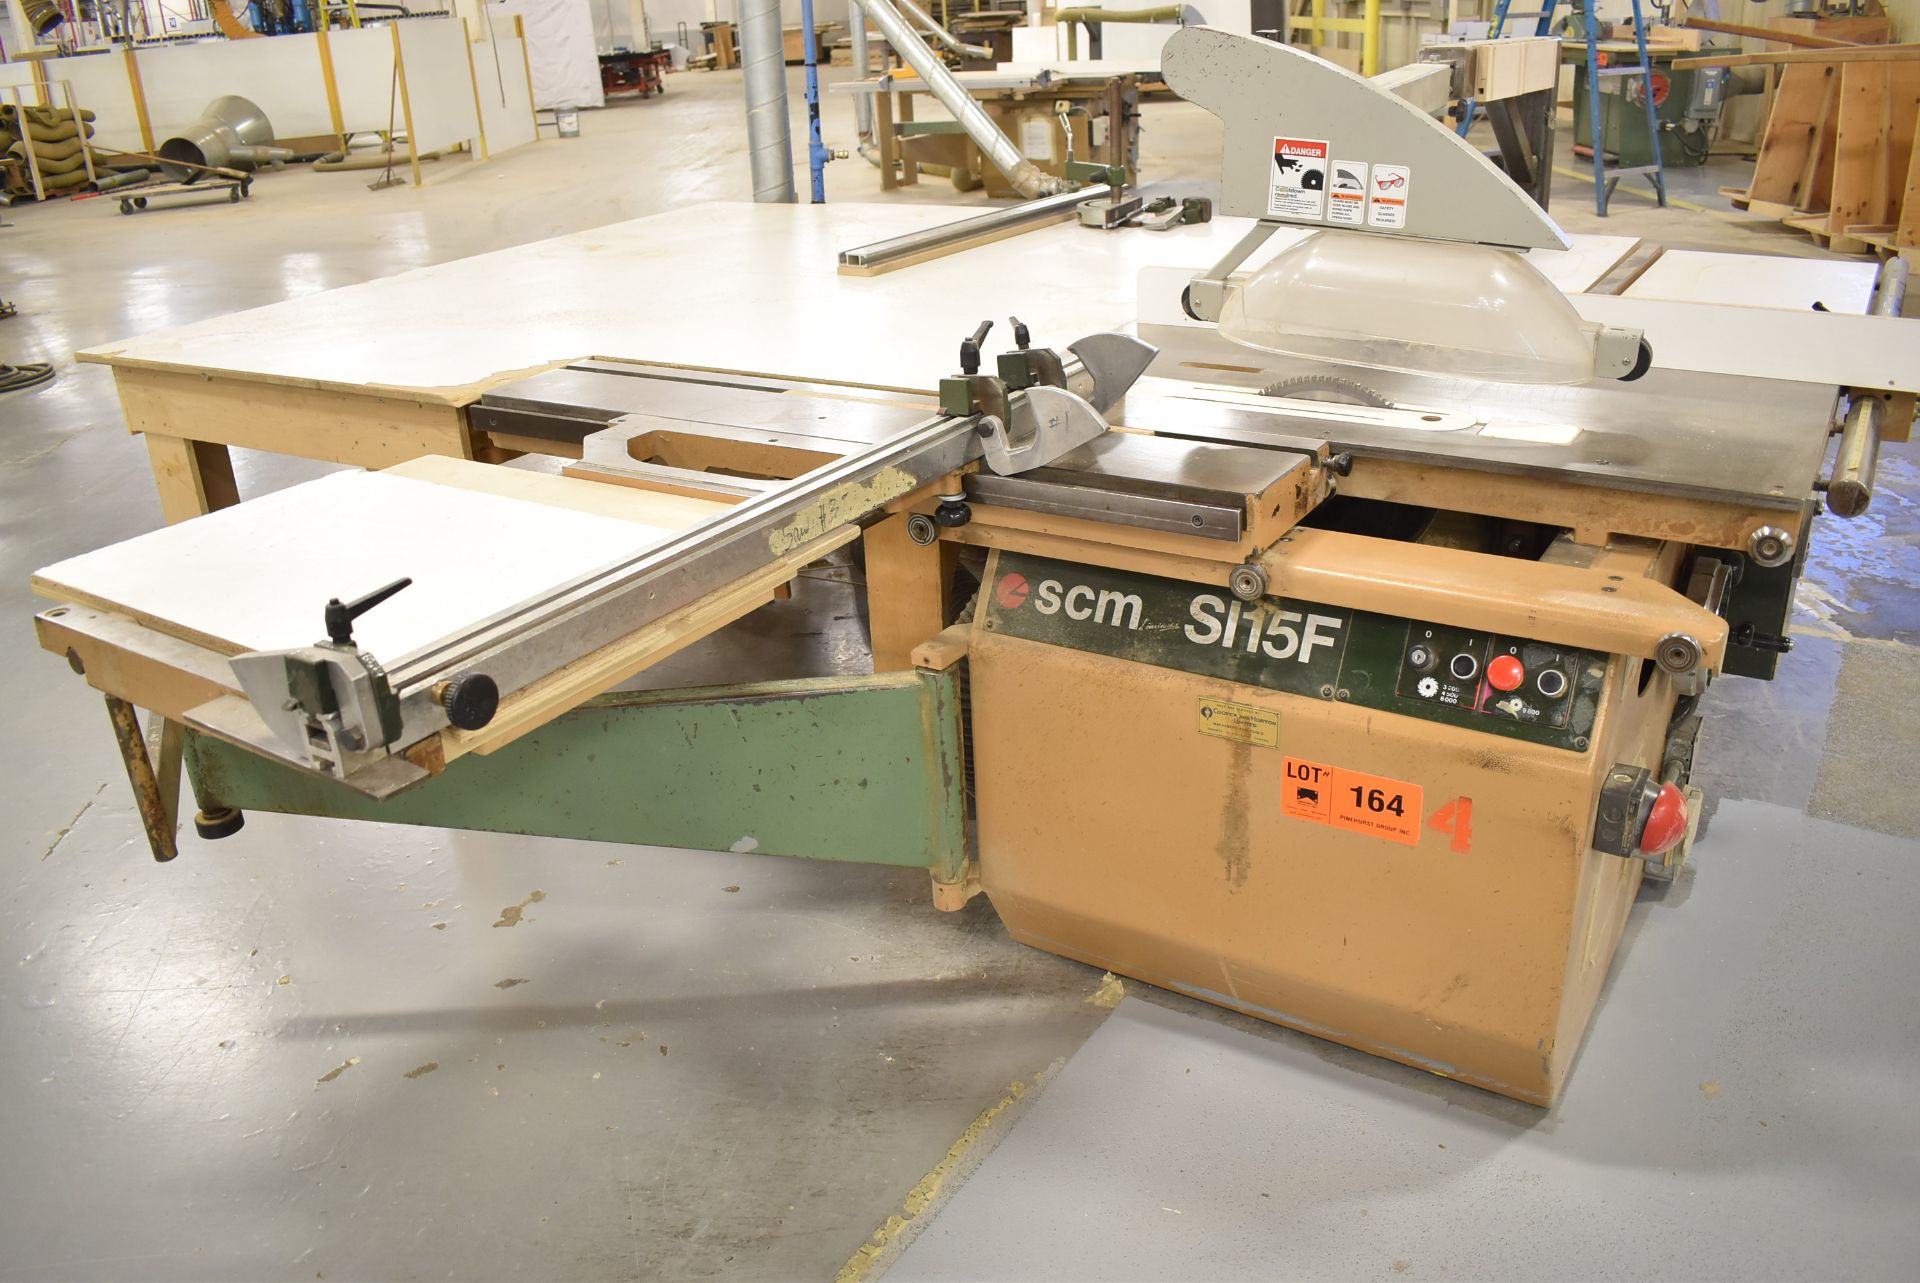 SCM SI15F 10" TABLE SAWS WITH 45"X32" TABLE, 45 DEG. MAX. BLADE ANGLE, SLIDING TABLE ATTACHMENT,